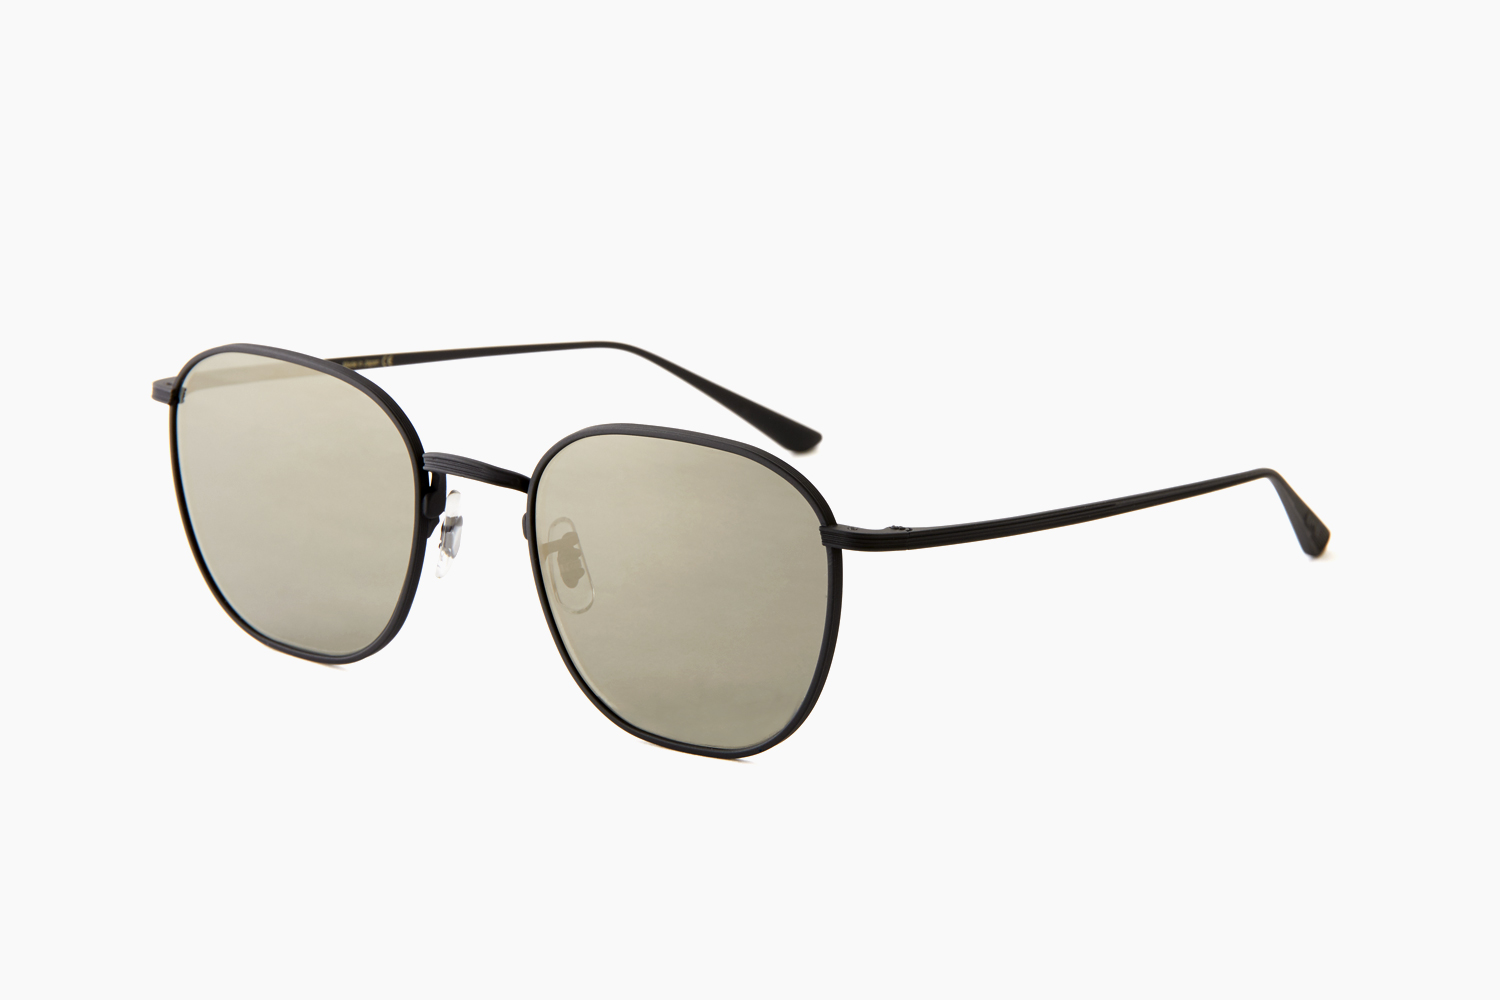 OLIVER PEOPLES｜OLIVER PEOPLES THE ROW｜Board Meeting OV1230ST  501739｜PRODUCT｜Continuer Inc.｜メガネ・サングラス｜Select Shop